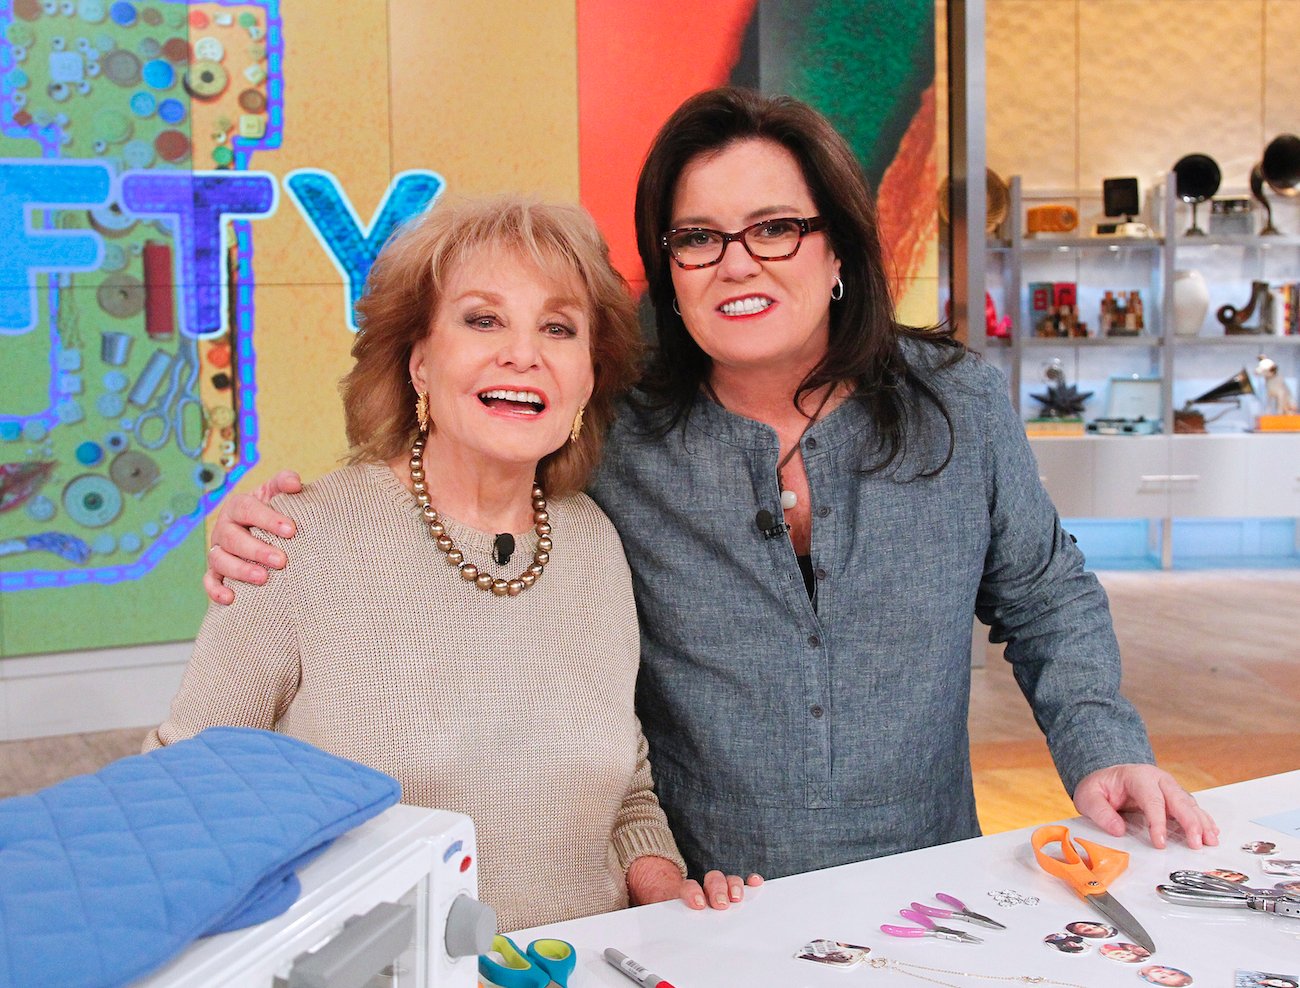 'The View': Barbara Walters in a beige sweater and Rosie O'Donnell in a gray top standing arm-in-arm while demonstrating products 